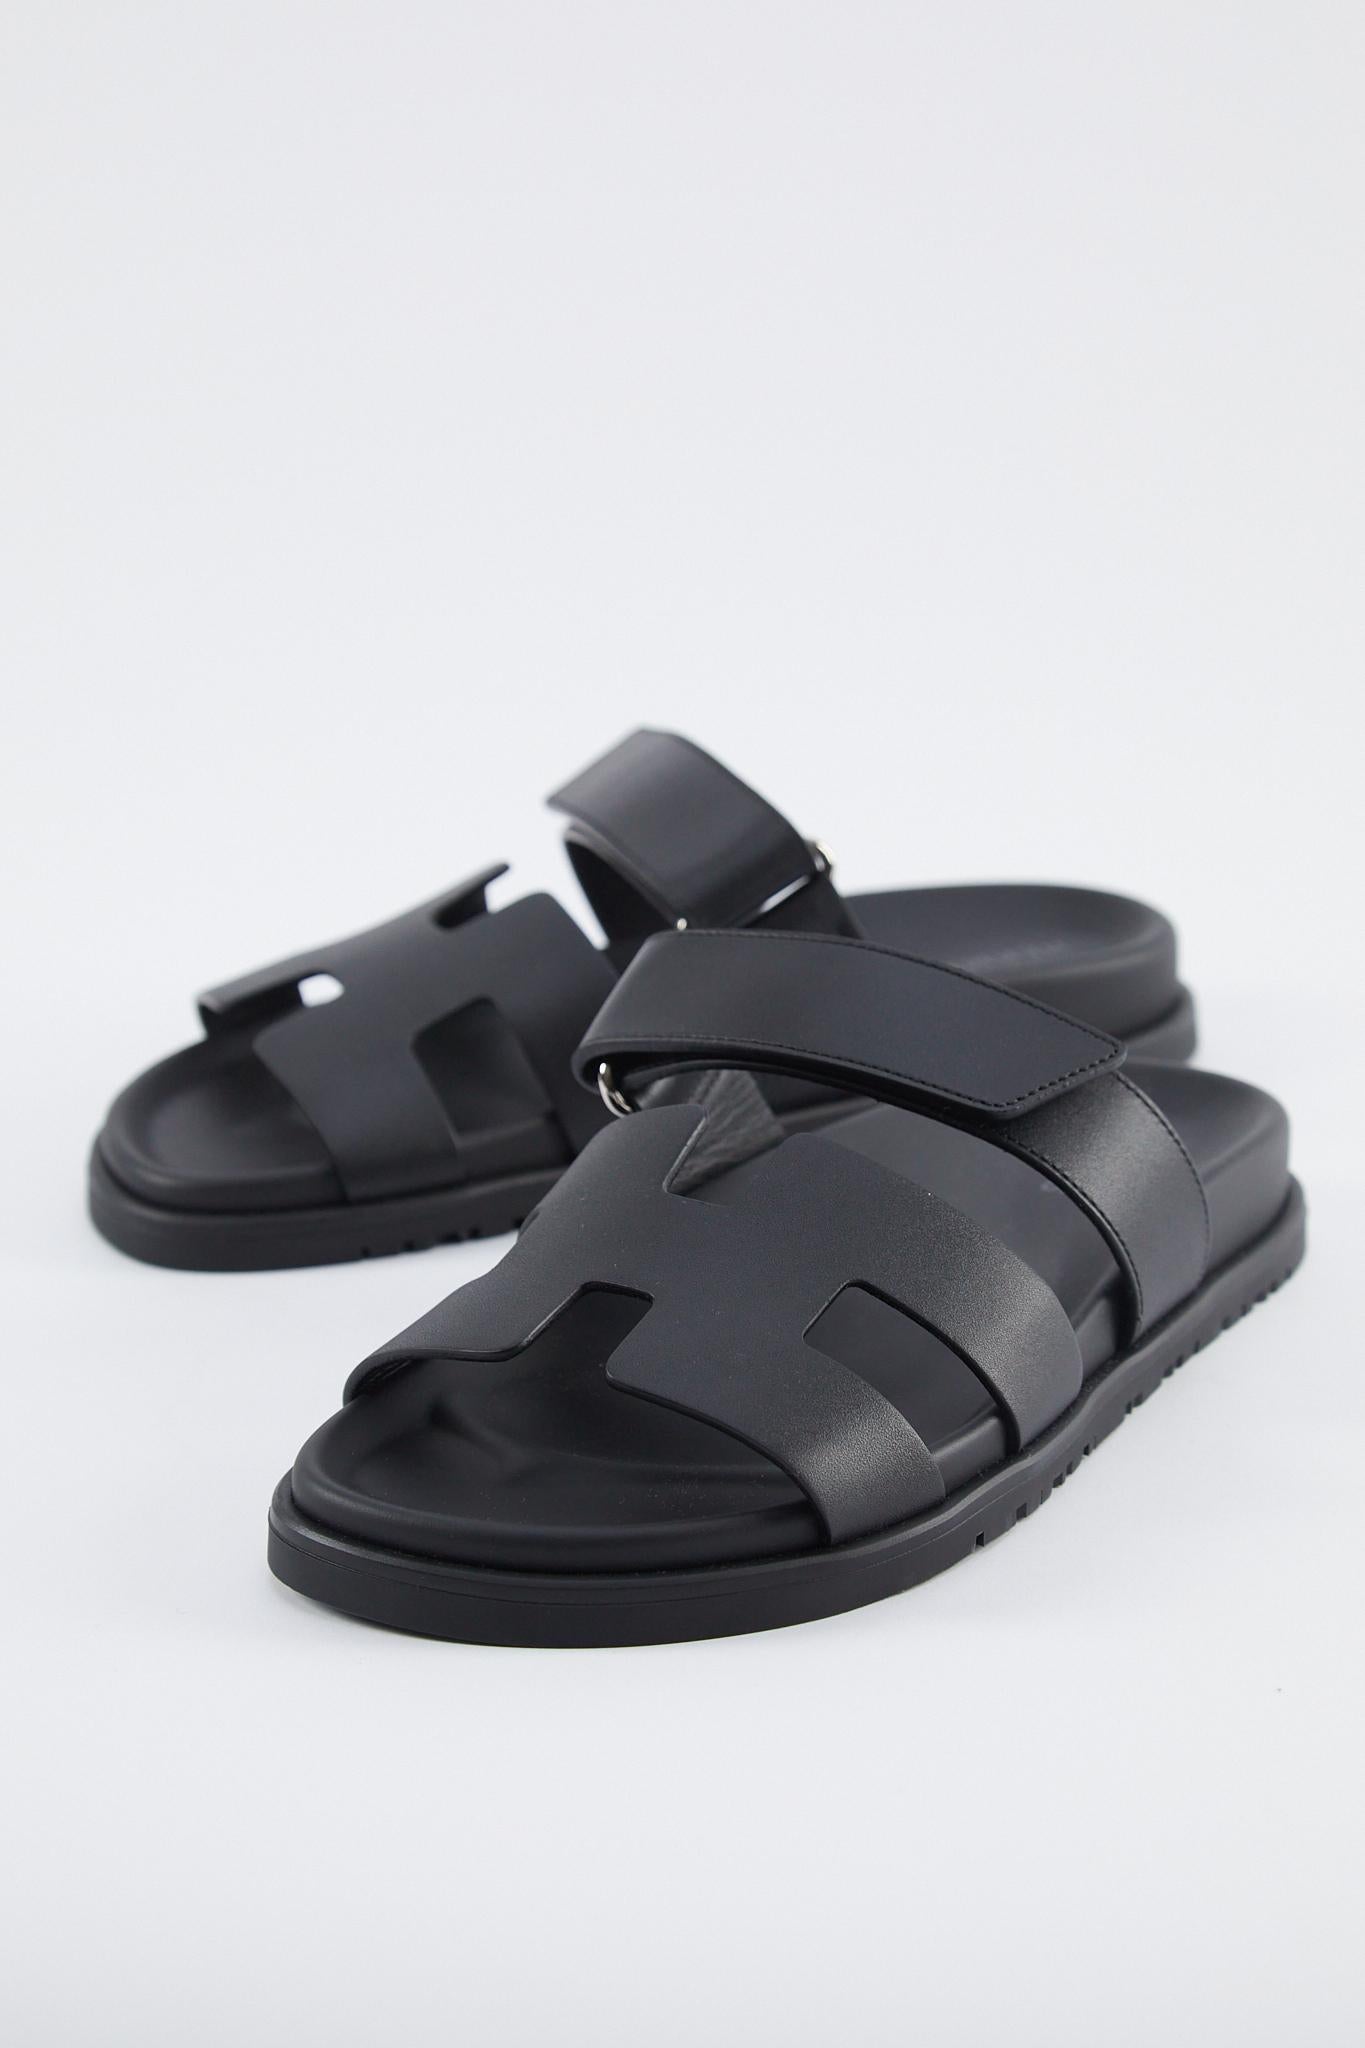 Hermès Chypre Techno-sandal in Swift with rubber sole and adjustable strap

Black calfskin insole and goatskin lining 

Accompanied by: Hermès box, dust bags and ribbon

Size 35.5